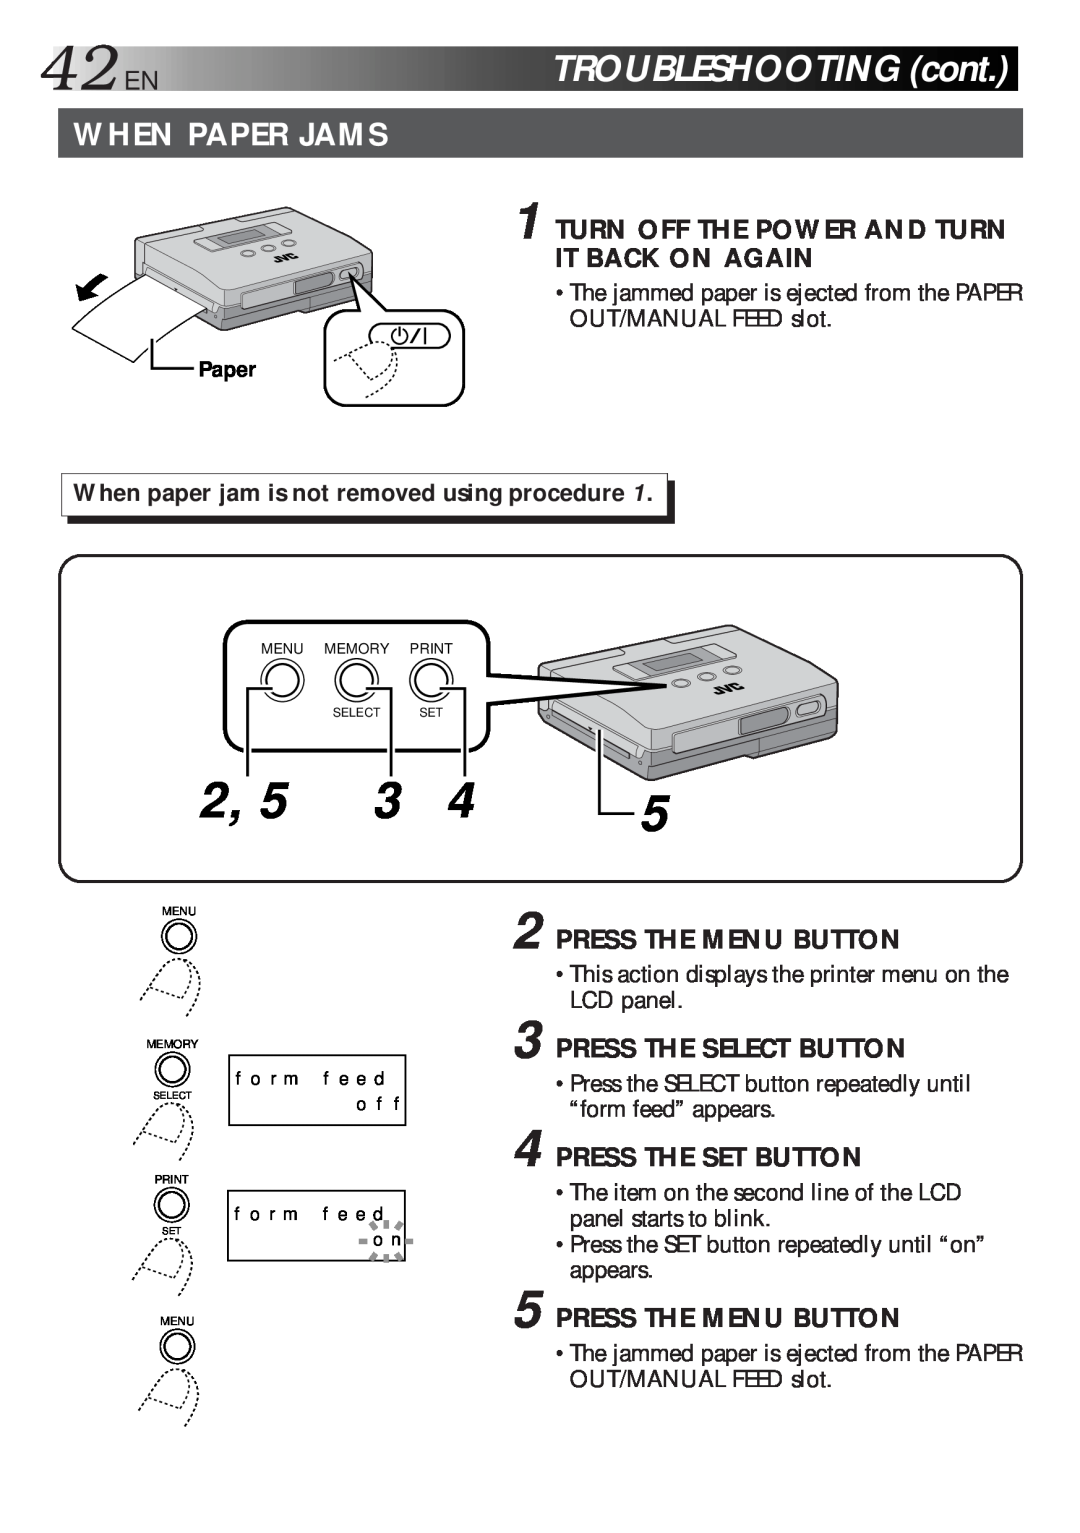 JVC GV-HT1 42ENTROUBLESHOOTINGcont, When Paper Jams, Turn Off The Power And Turn It Back On Again, Press The Menu Button 